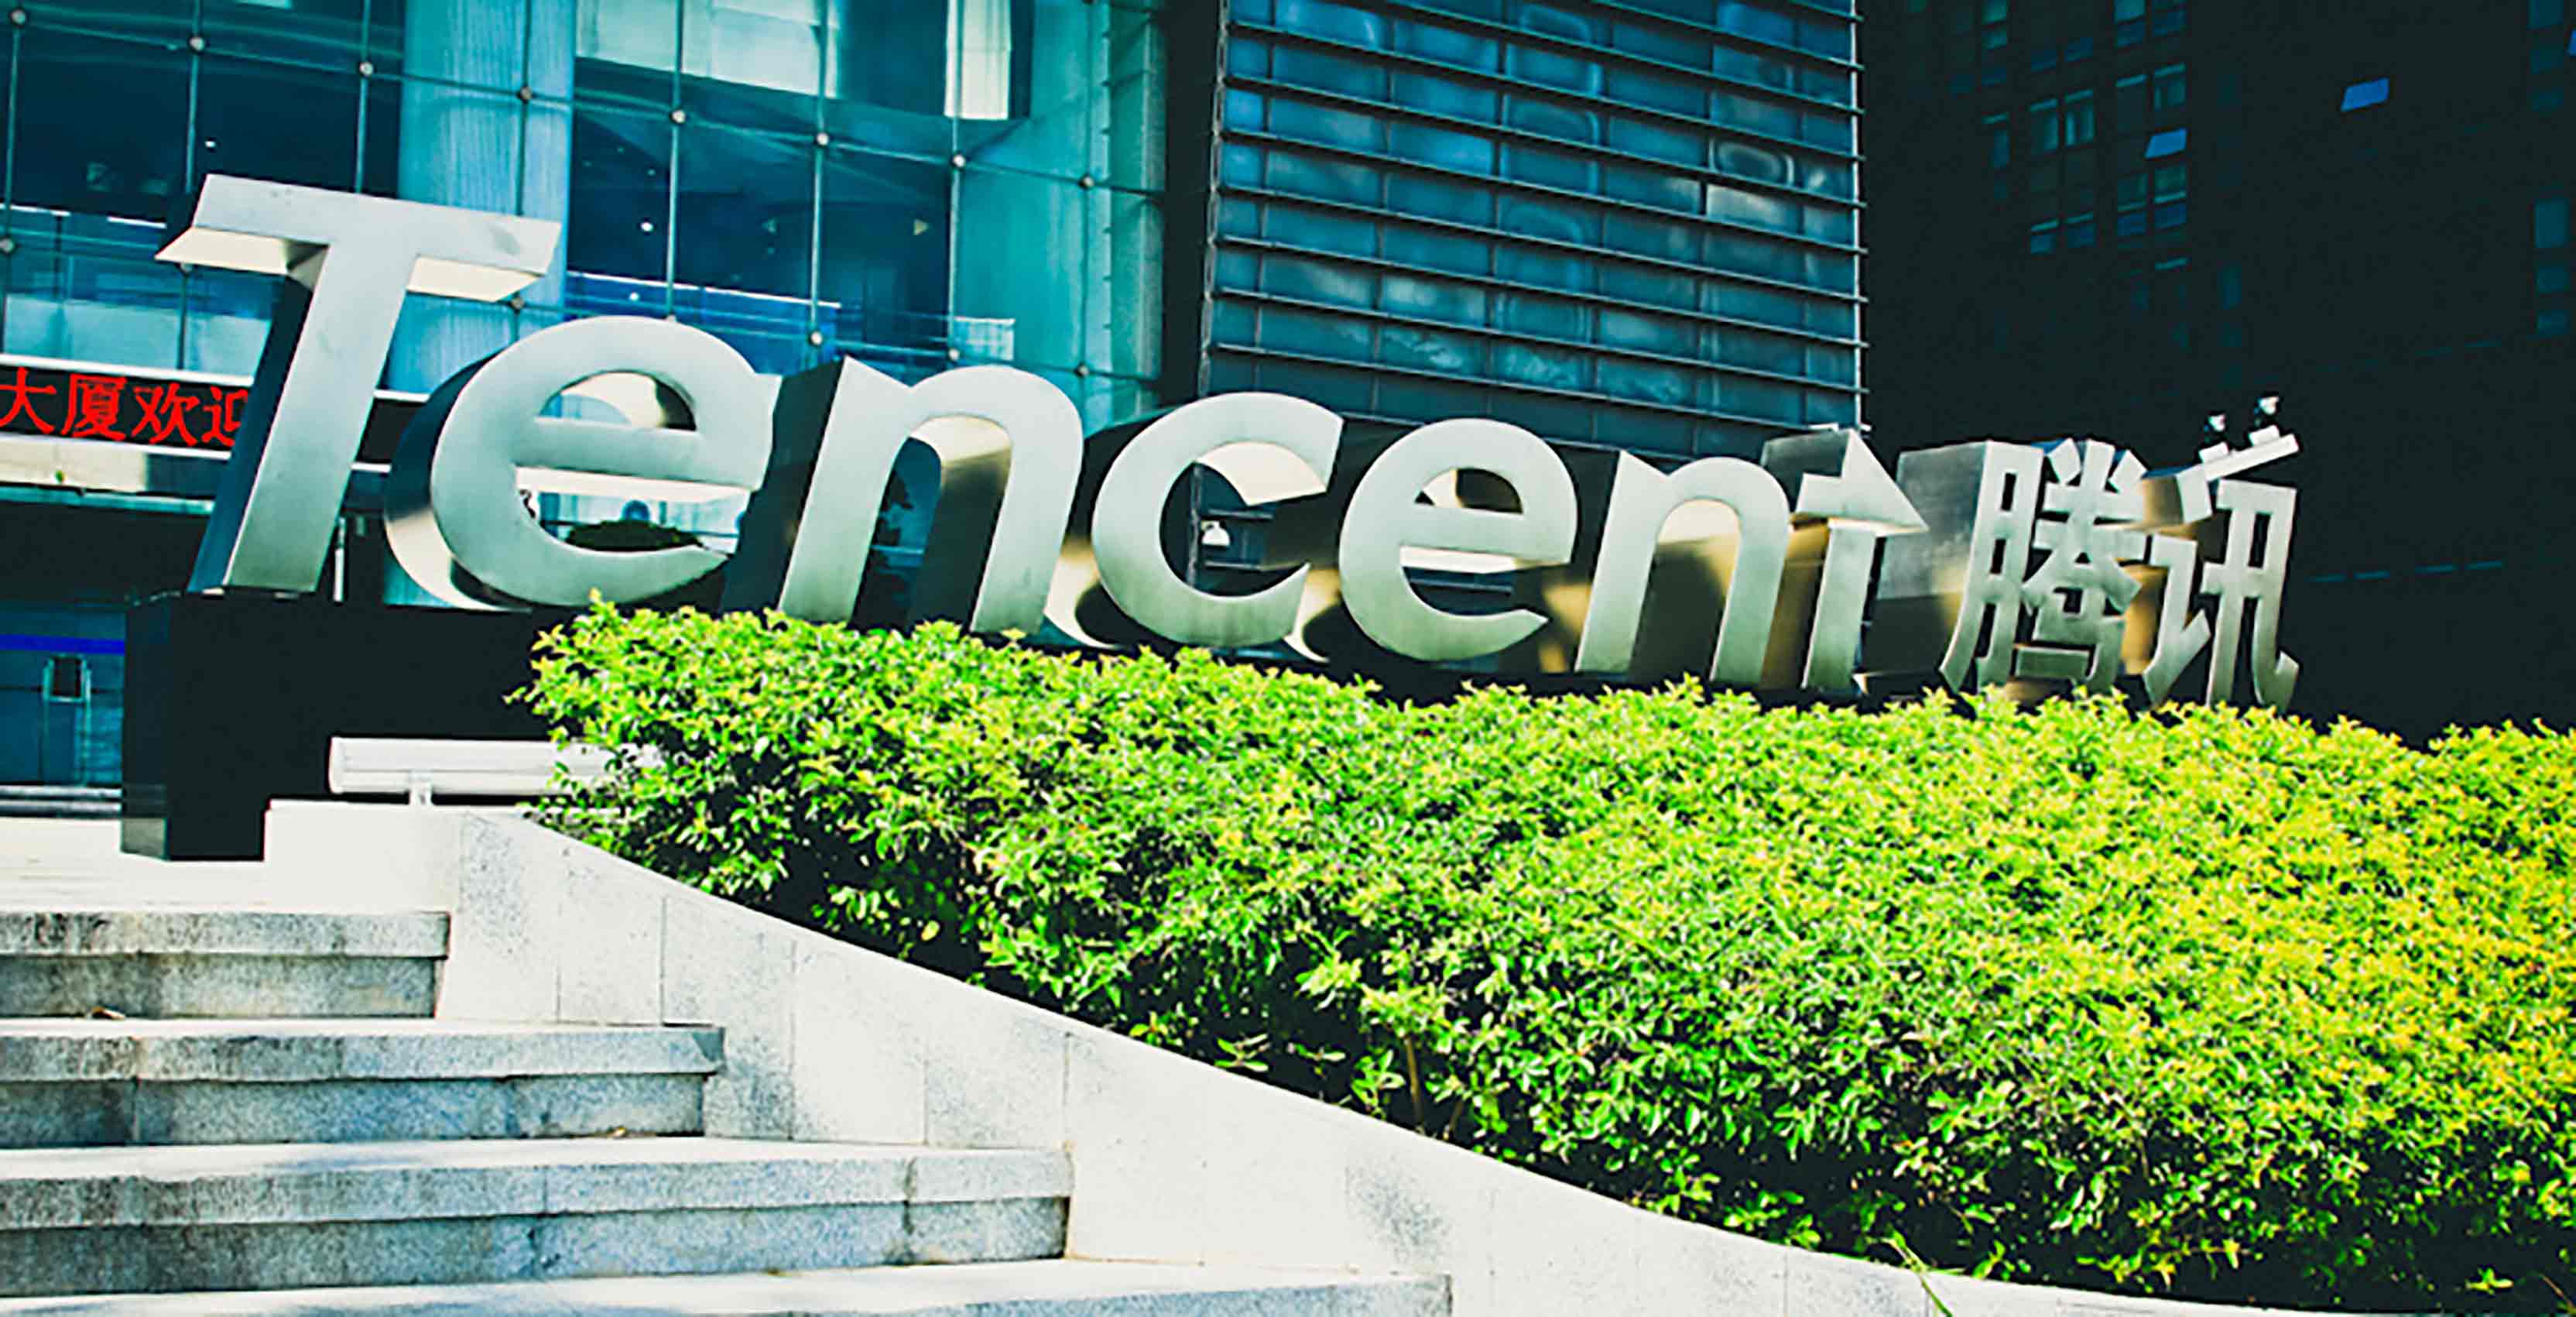 Tencent logo in China